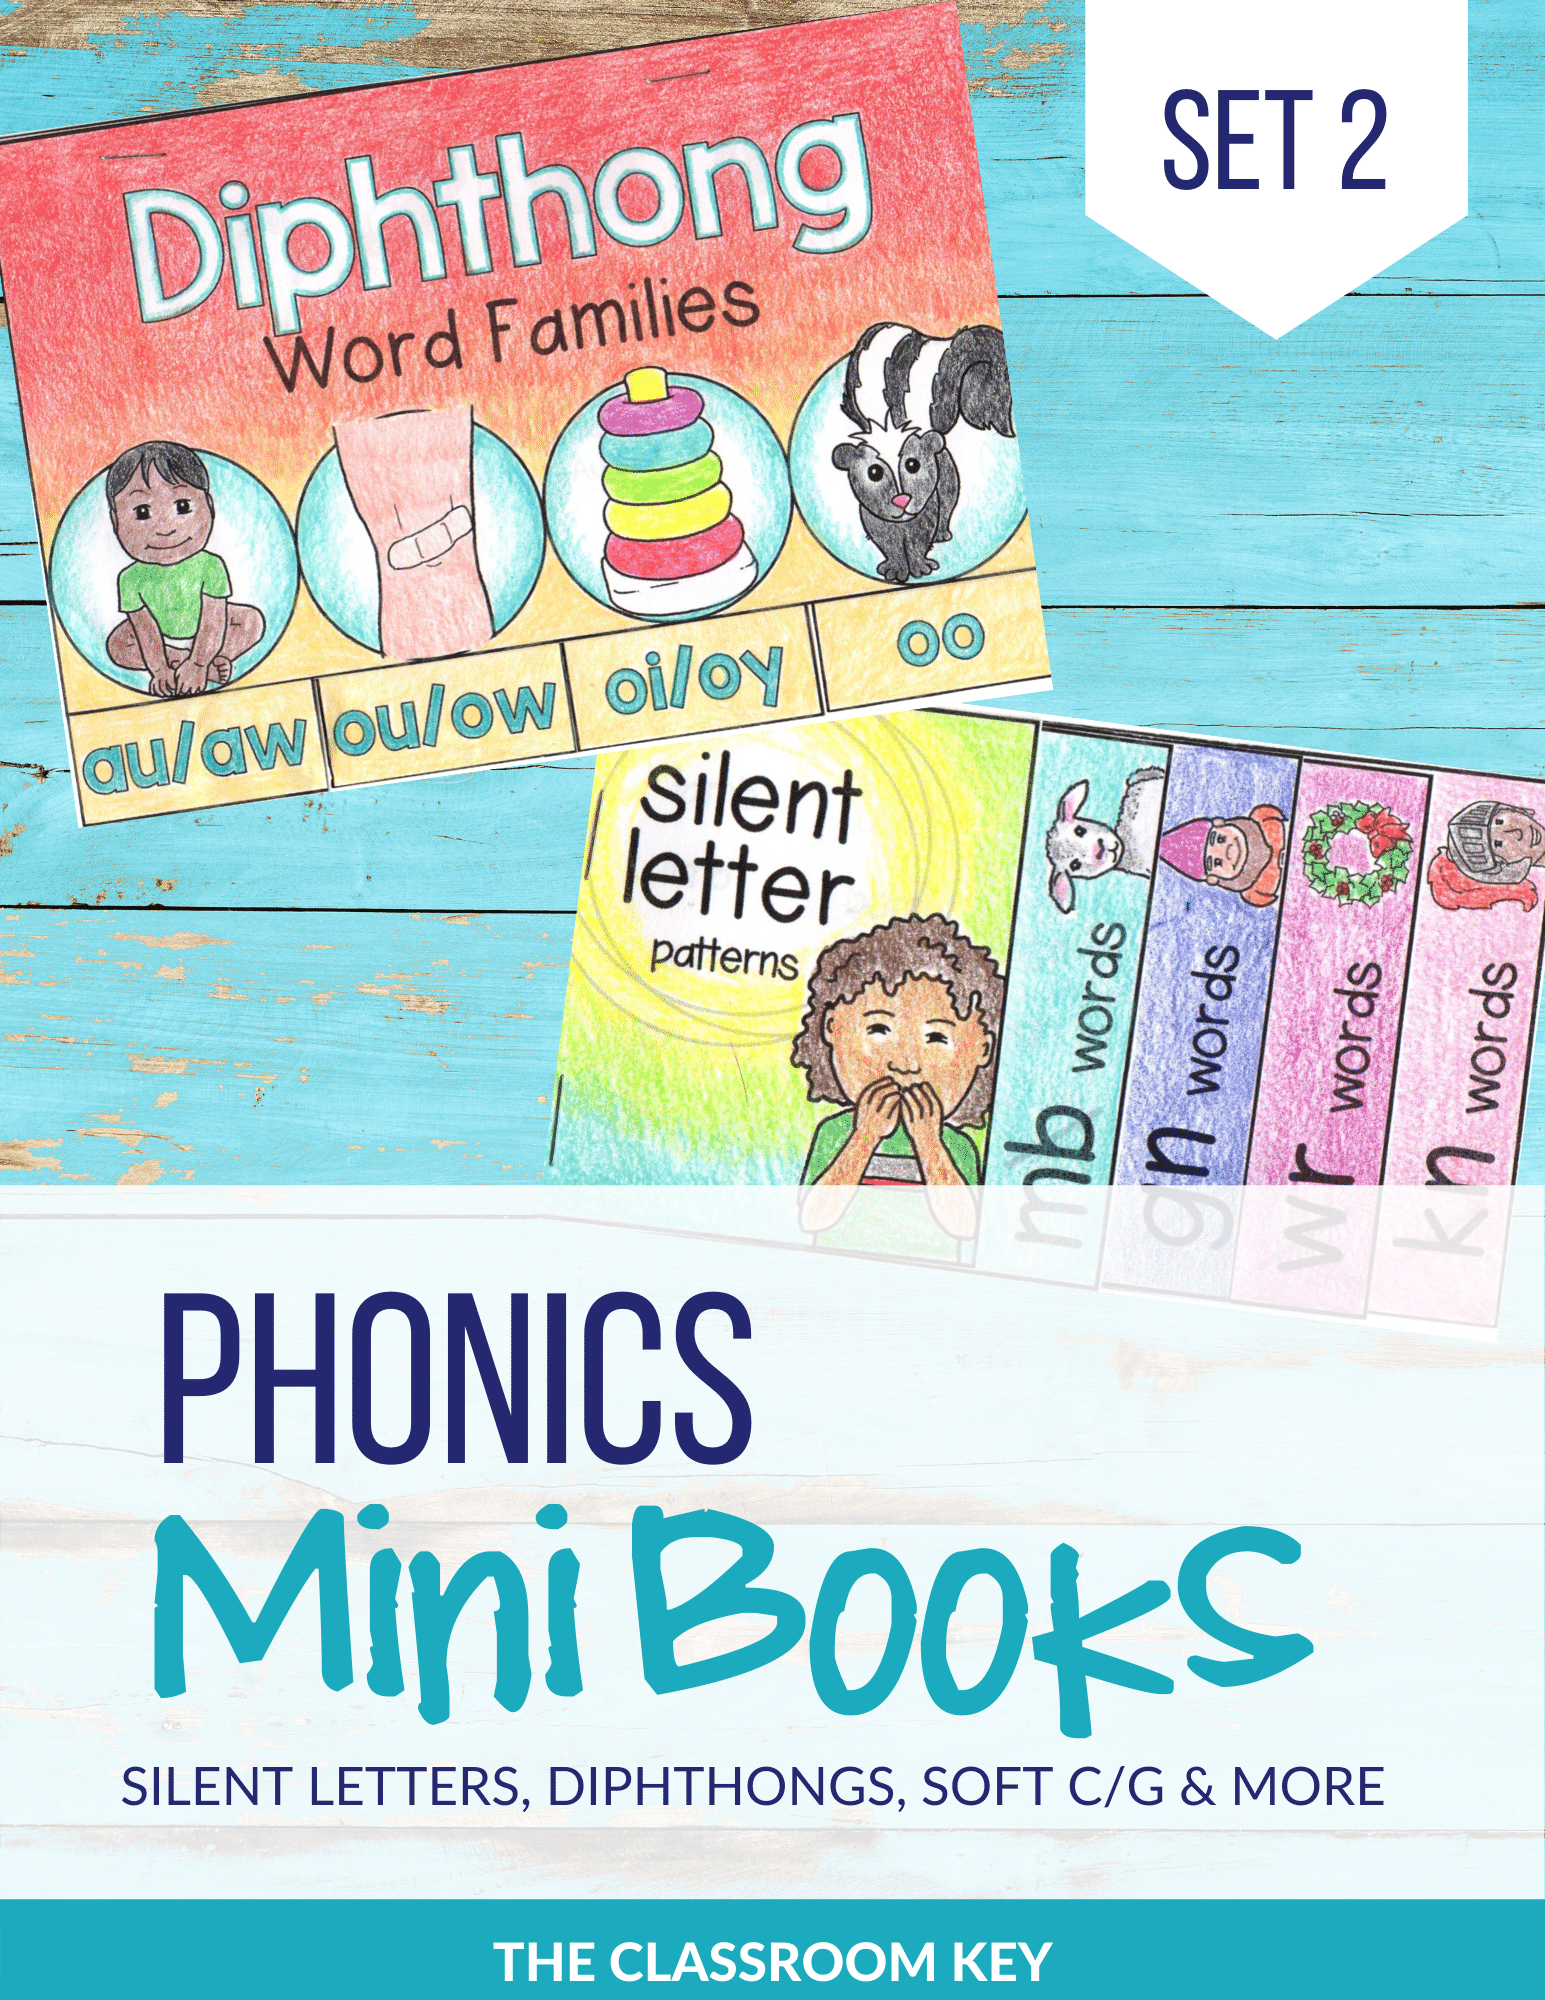 Improve reading skills with phonics mini books. Each page has words lists for various phonics patterns including silent letters, diphthongs, and more! perfect for reading groups or intervention in second or third grade